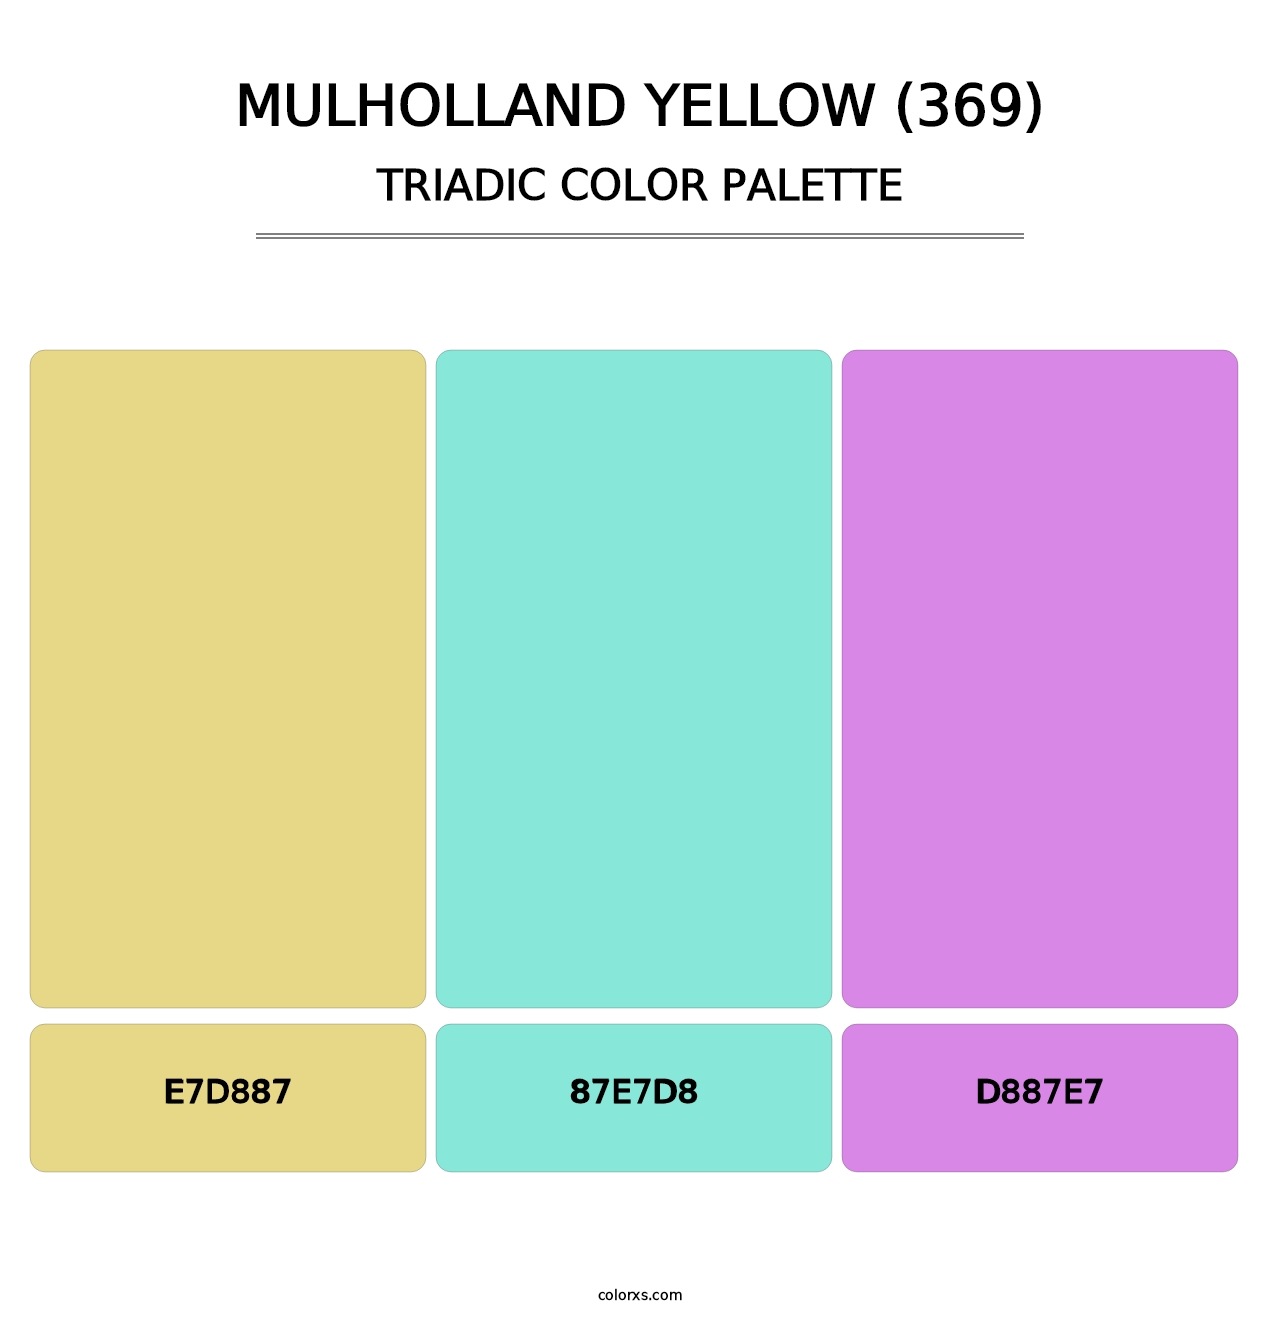 Mulholland Yellow (369) - Triadic Color Palette